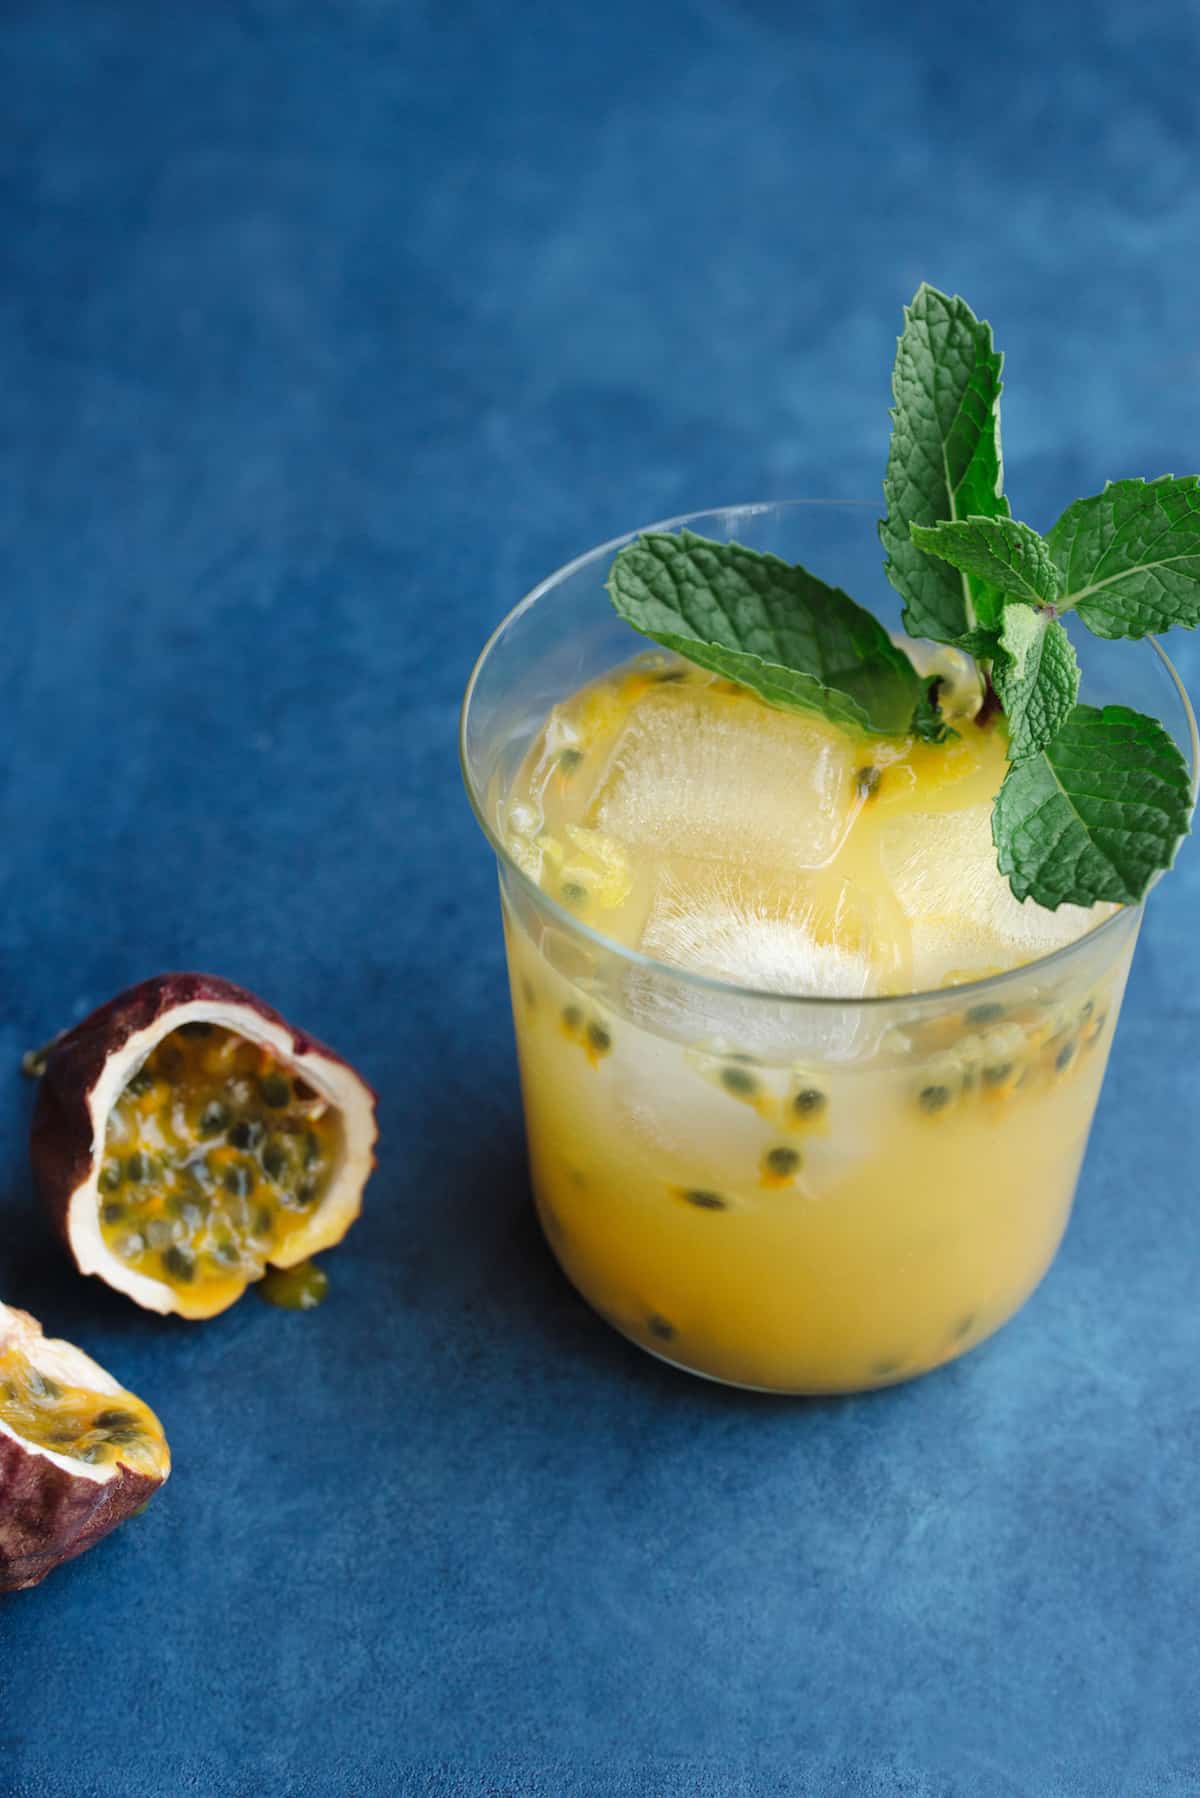 Passion Fruit Tequila Cocktail Recipe by Tiffani Thiessen